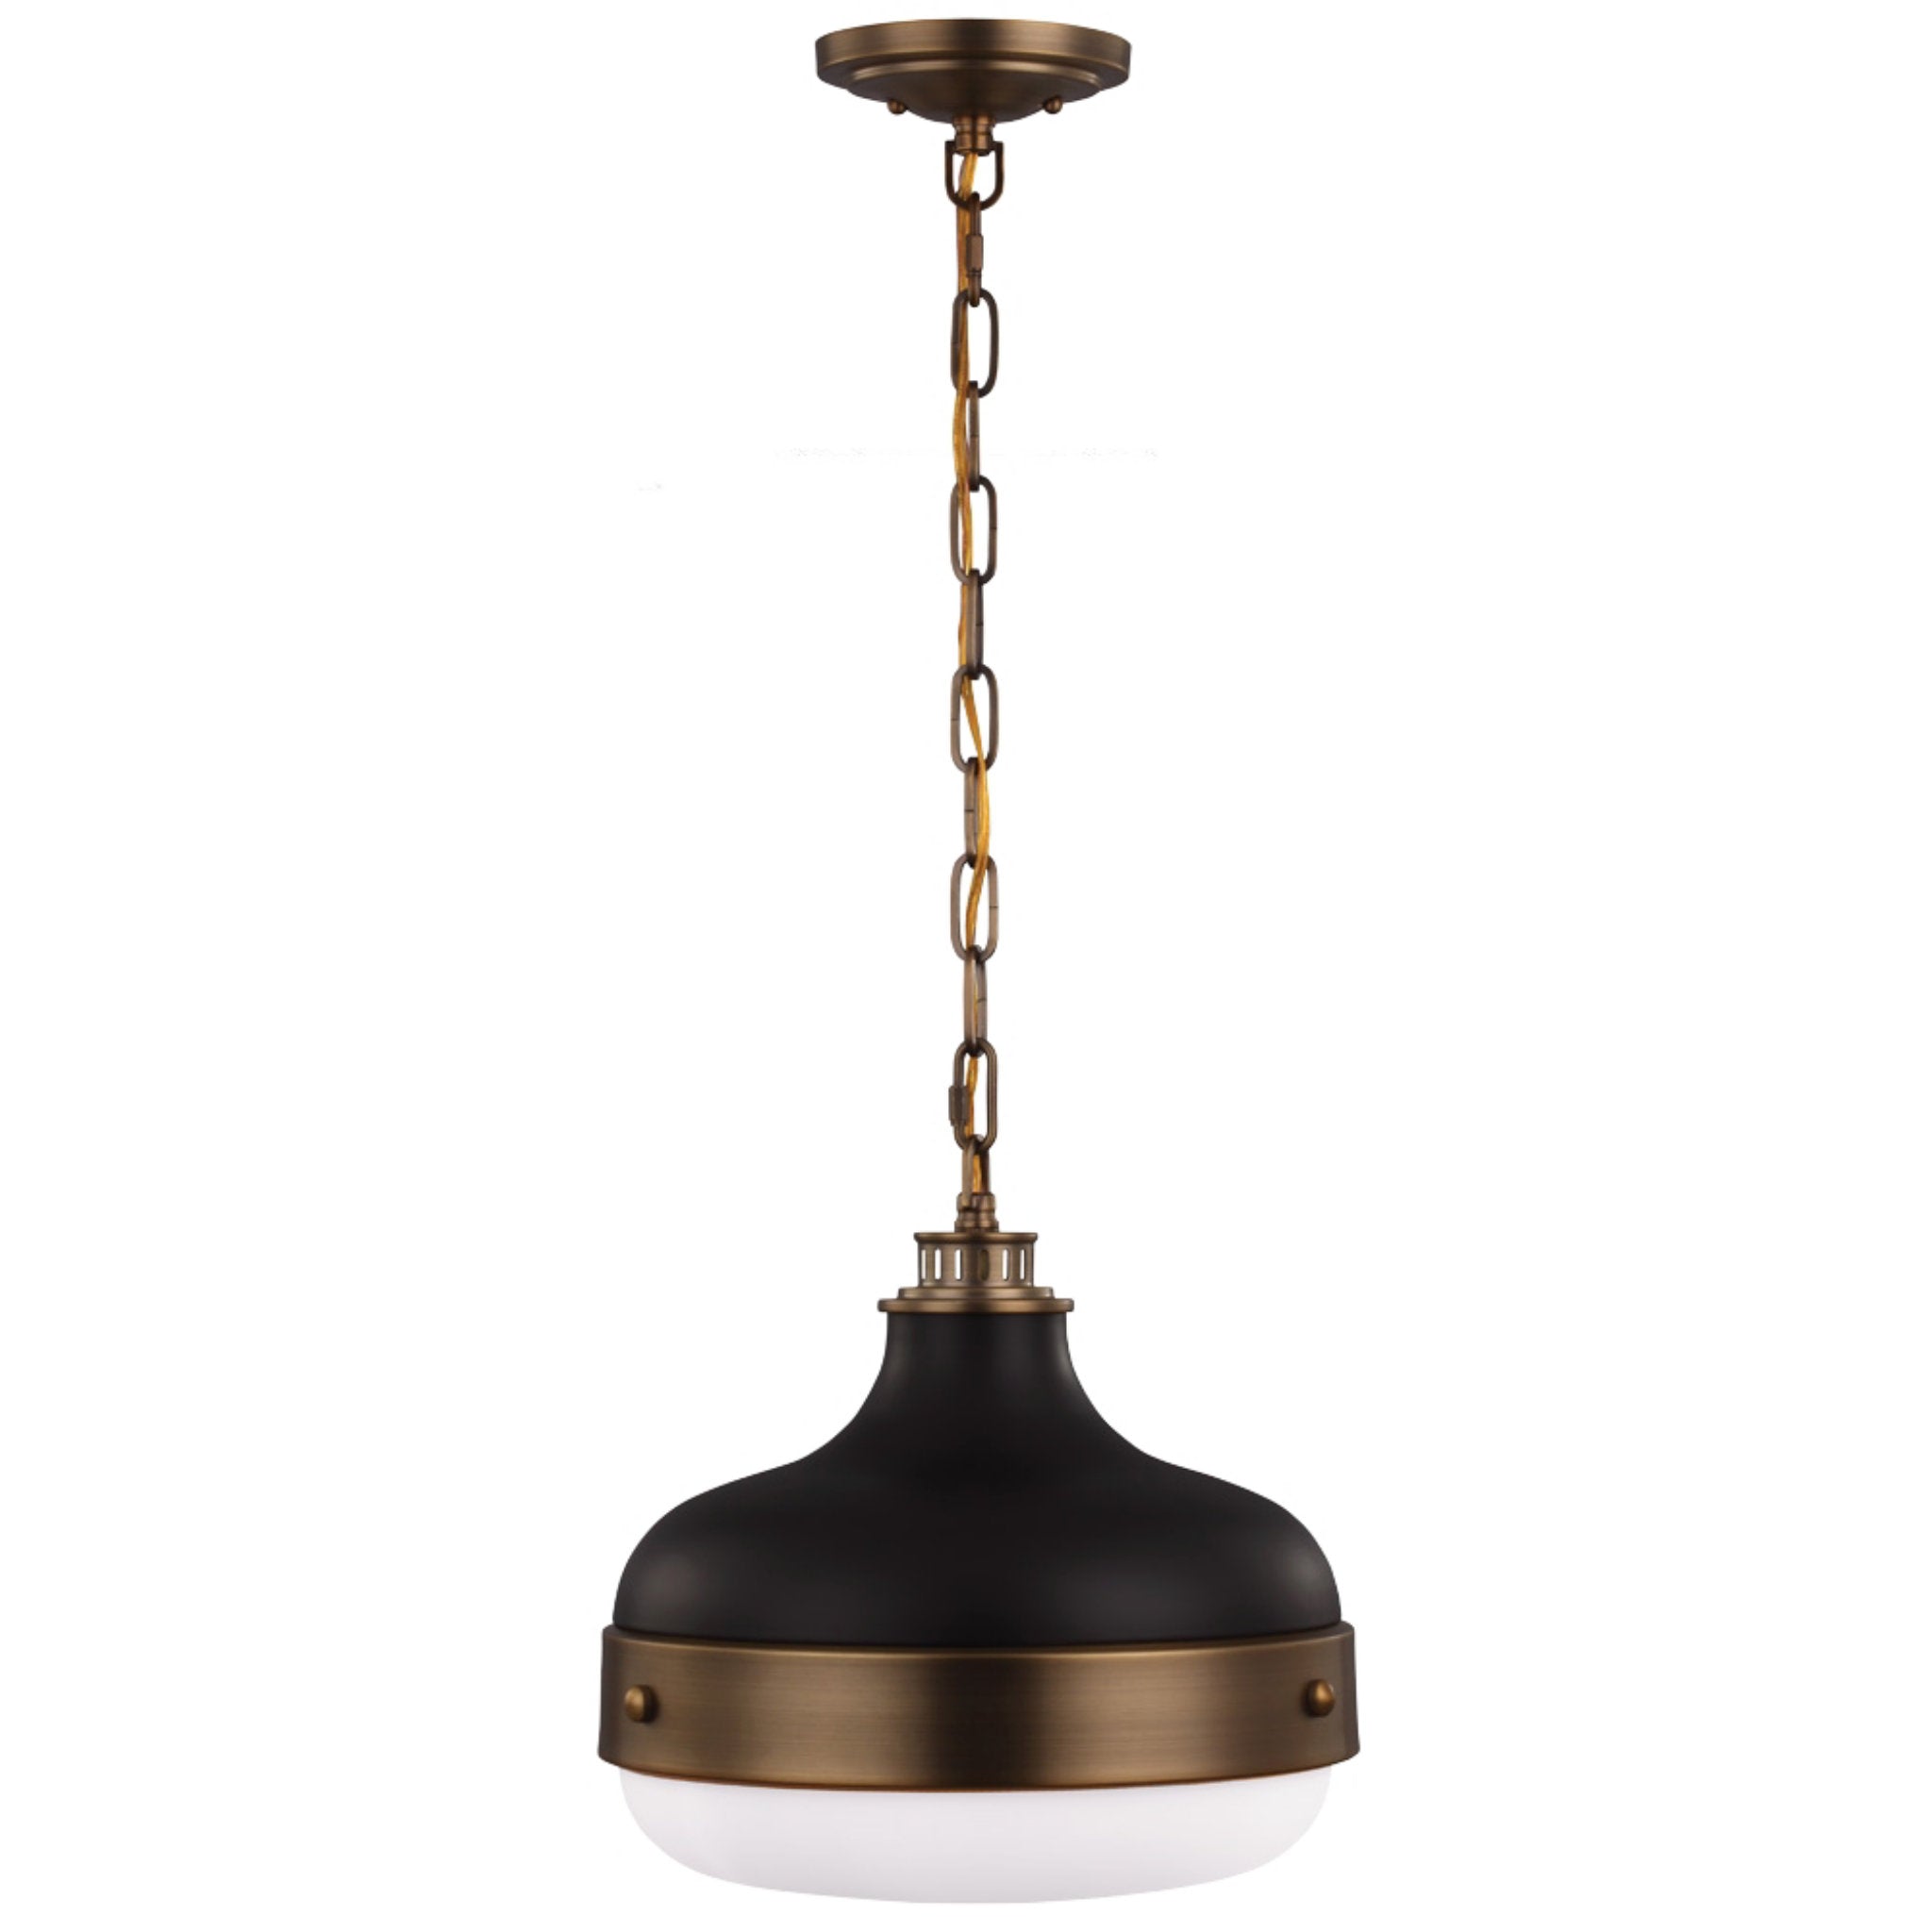 Cadence Pendant Period Inspired Dark Sky 13.125" Height Steel Round White Opal Etched Shade in Antique Brass / Matte Black